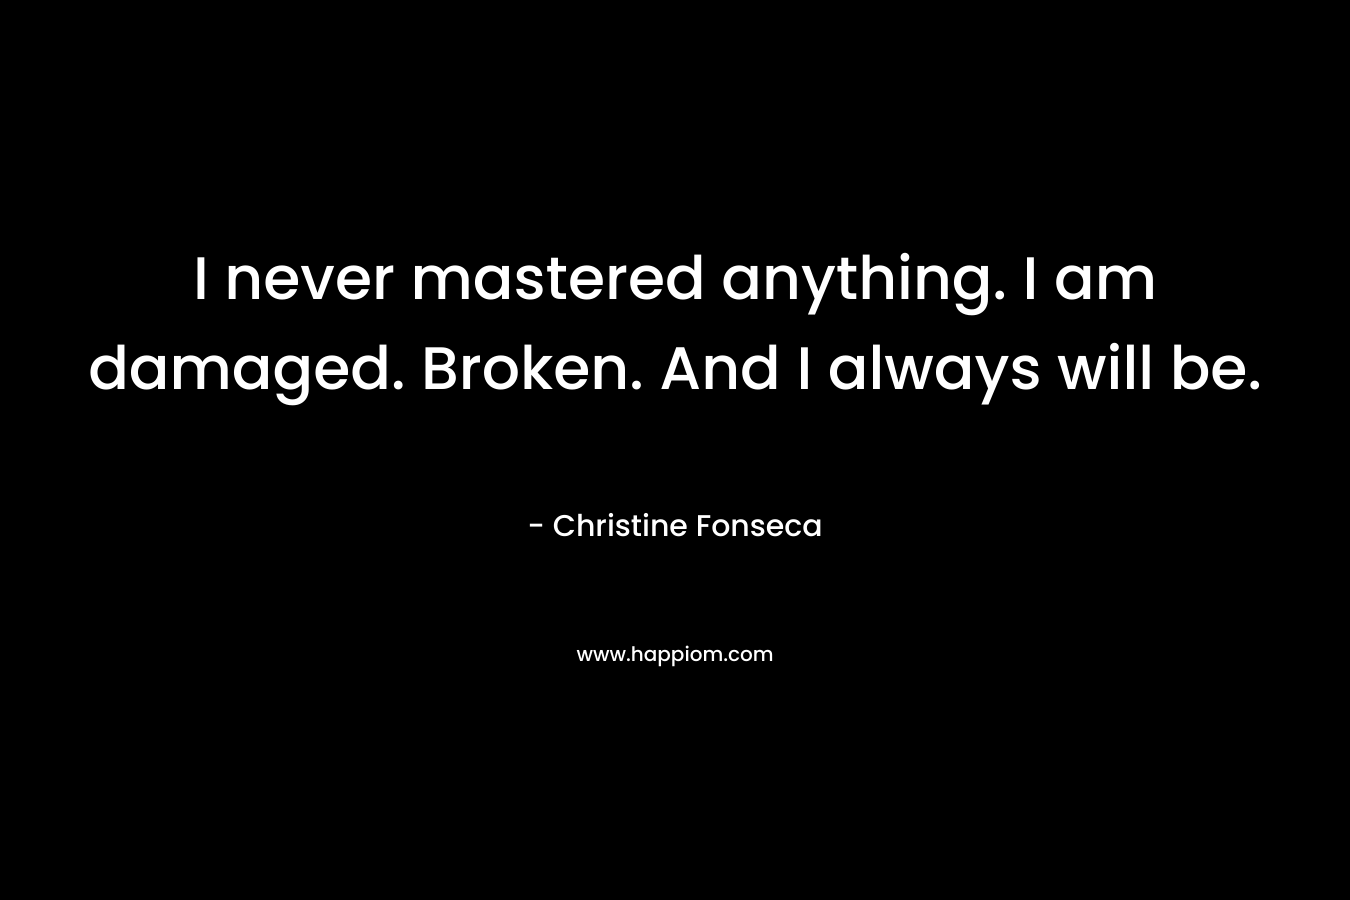 I never mastered anything. I am damaged. Broken. And I always will be.